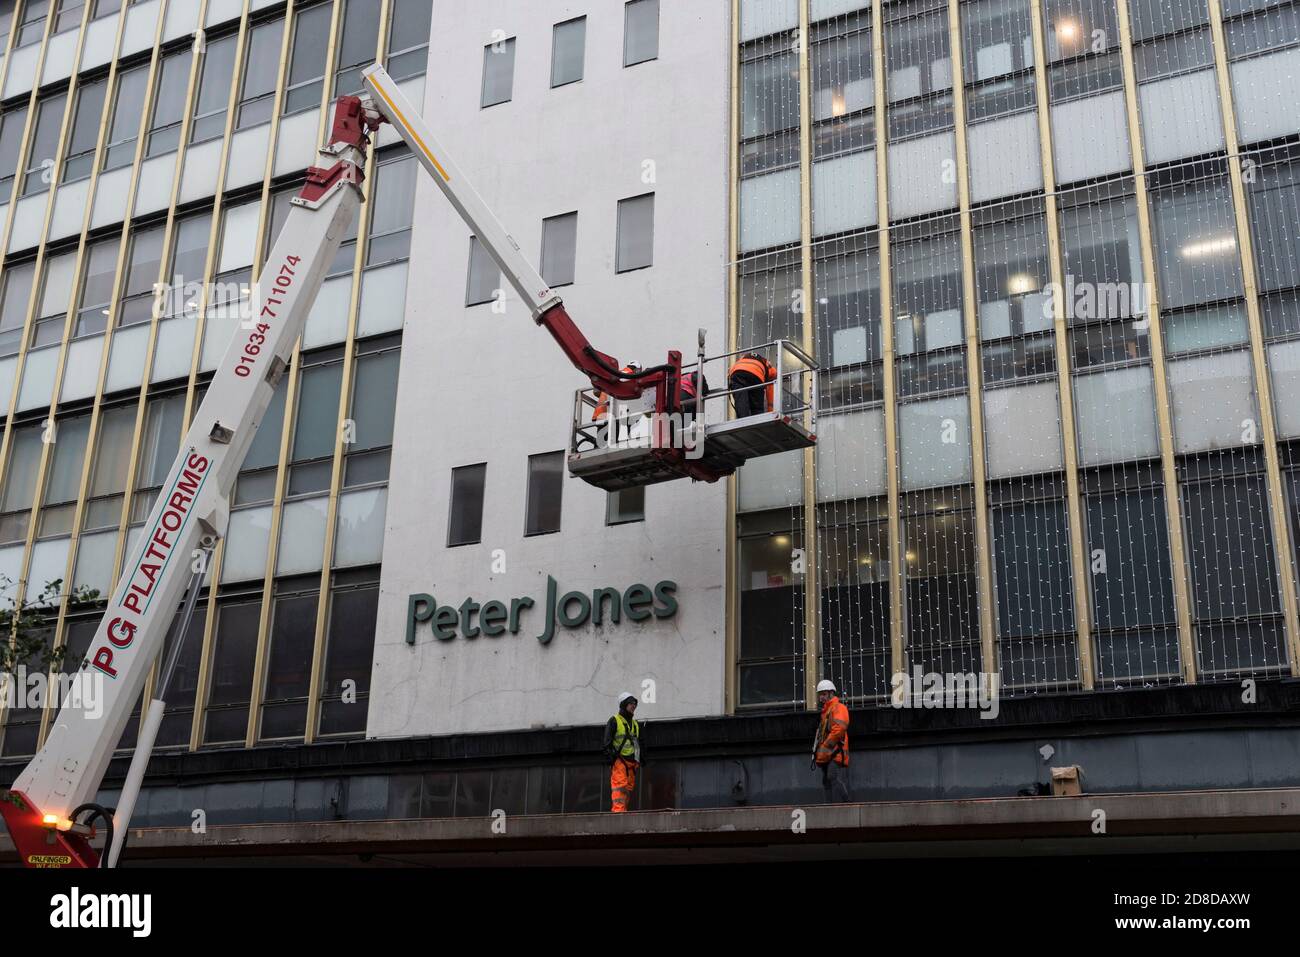 London, UK.  29 October 2020.  Workmen install Christmas lights to the exterior of Peter Jones department store in Sloane Square.  The store is part of the John Lewis group whose flagship store in Oxford Street has been granted permission to turn half of the building into offices as the company undergoes a restructuring plan to stem a downturn in business performance suffered during the ongoing coronavirus pandemic. In addition, staff will not be paid their annual bonus for the first time since 1953.  Credit: Stephen Chung / Alamy Live News Stock Photo